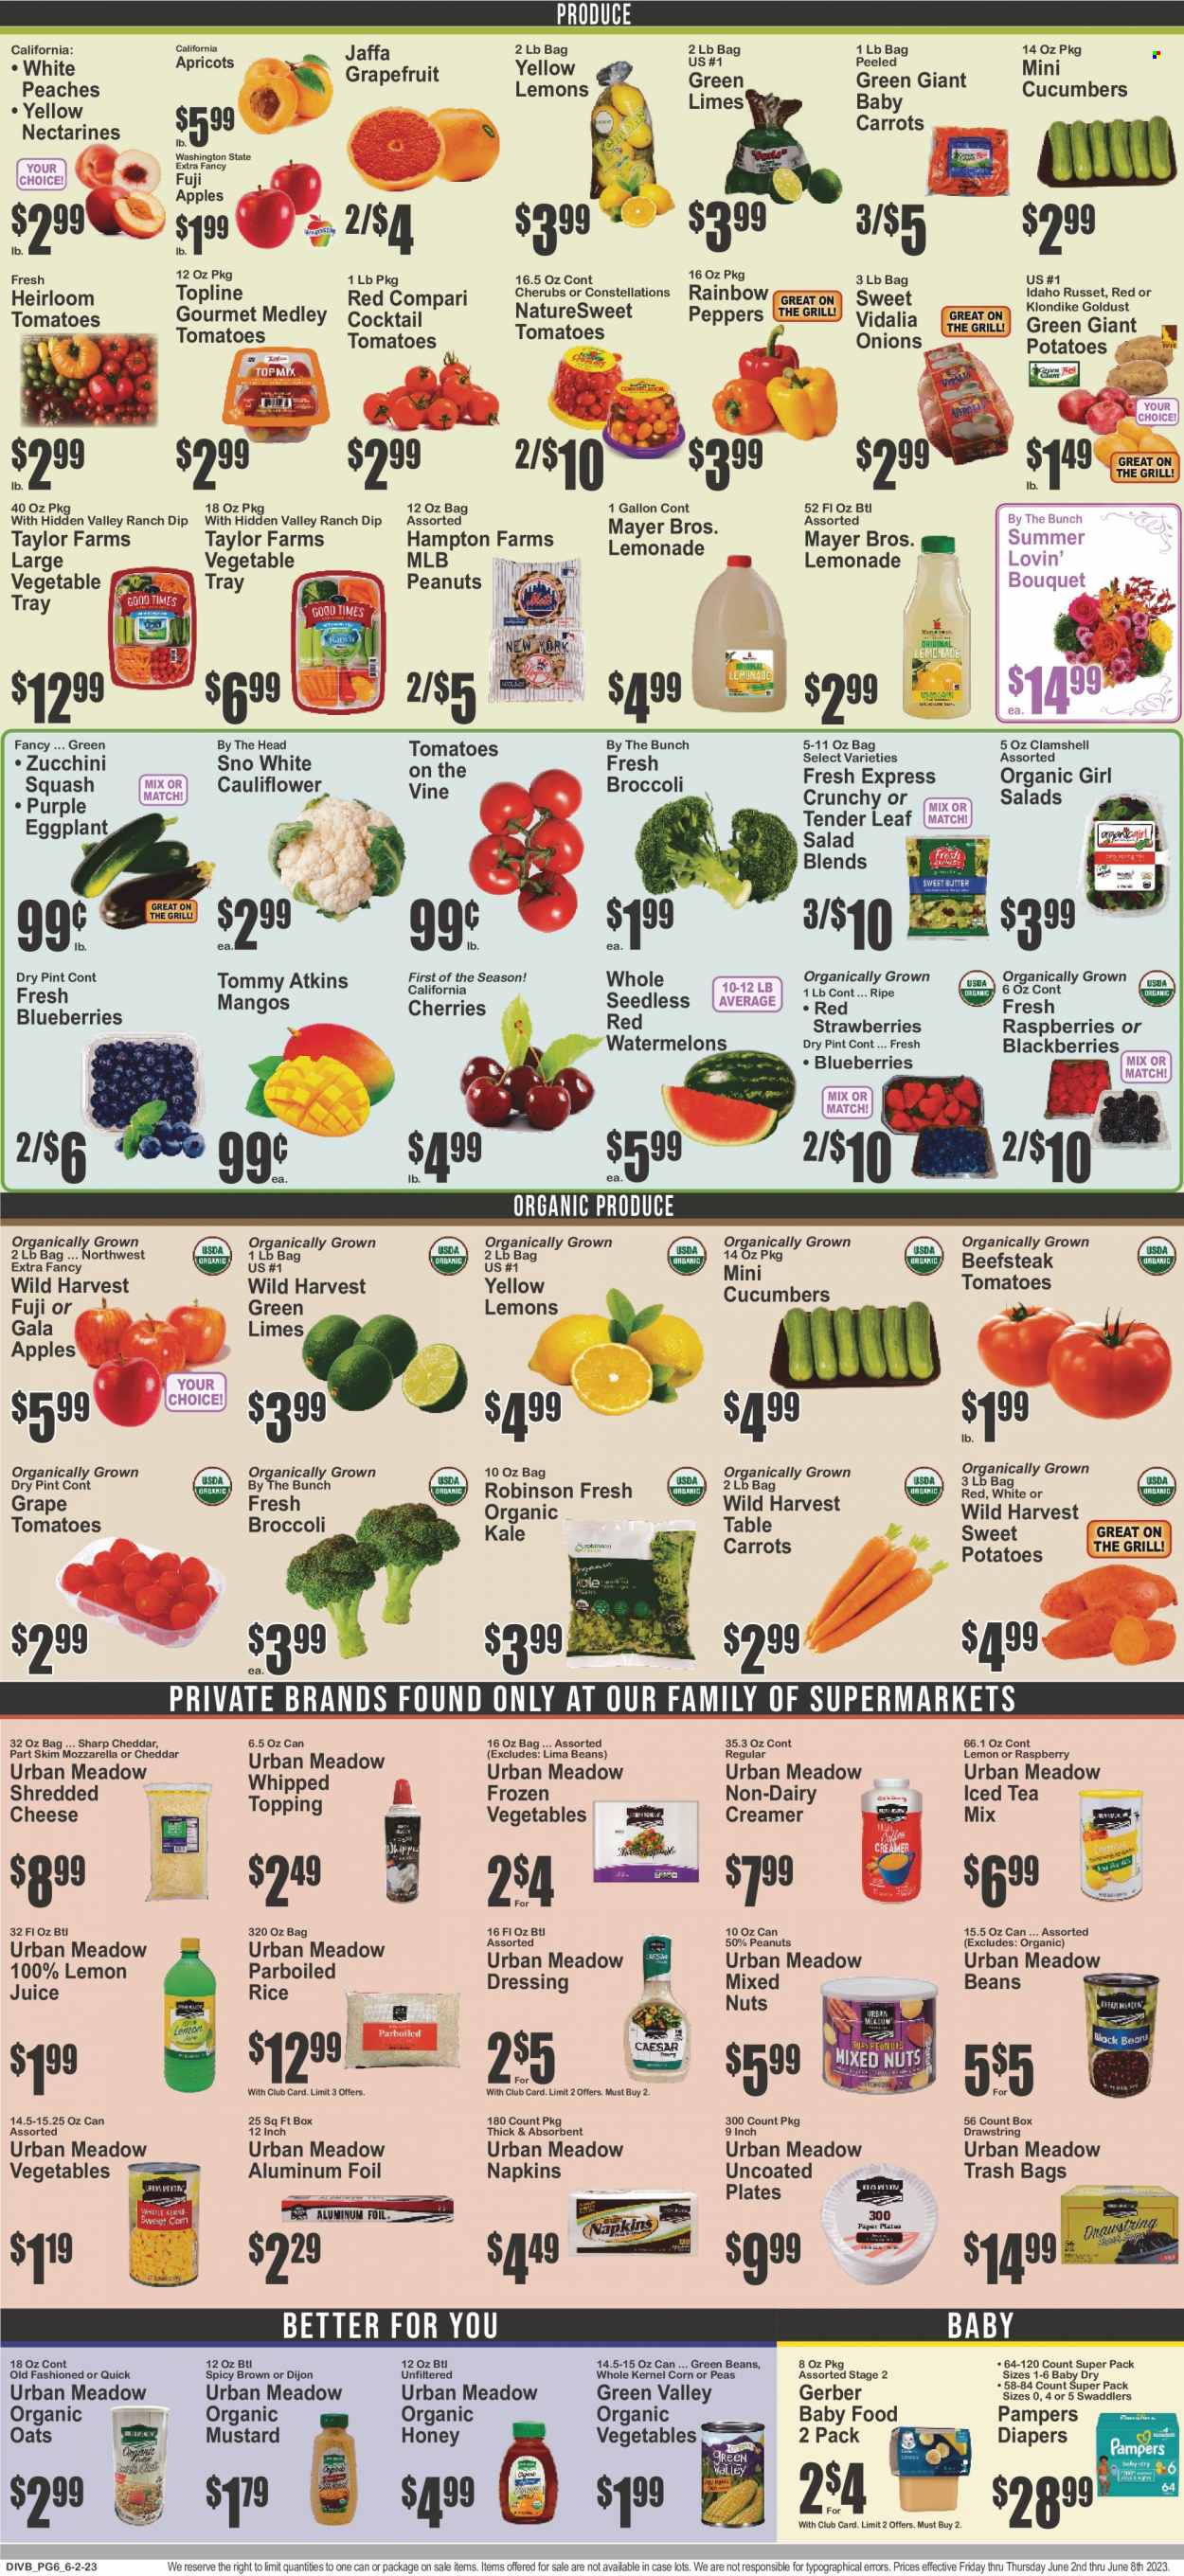 thumbnail - Food Universe Flyer - 06/02/2023 - 06/08/2023 - Sales products - beans, broccoli, carrots, corn, cucumber, green beans, russet potatoes, sweet potato, tomatoes, zucchini, kale, potatoes, peas, onion, salad, peppers, eggplant, Wild Harvest, blackberries, Gala, grapefruits, limes, raspberries, strawberries, watermelon, cherries, Fuji apple, apricots, peaches, mozzarella, shredded cheese, non dairy creamer, creamer, dip, frozen vegetables, lima beans, Gerber, oats, topping, rice, parboiled rice, mustard, honey, peanuts, mixed nuts, lemonade, ice tea, lemon juice, cocktail, Pampers, napkins, nappies, trash bags, tray, plate, aluminium foil, grill, bouquet, nectarines. Page 6.